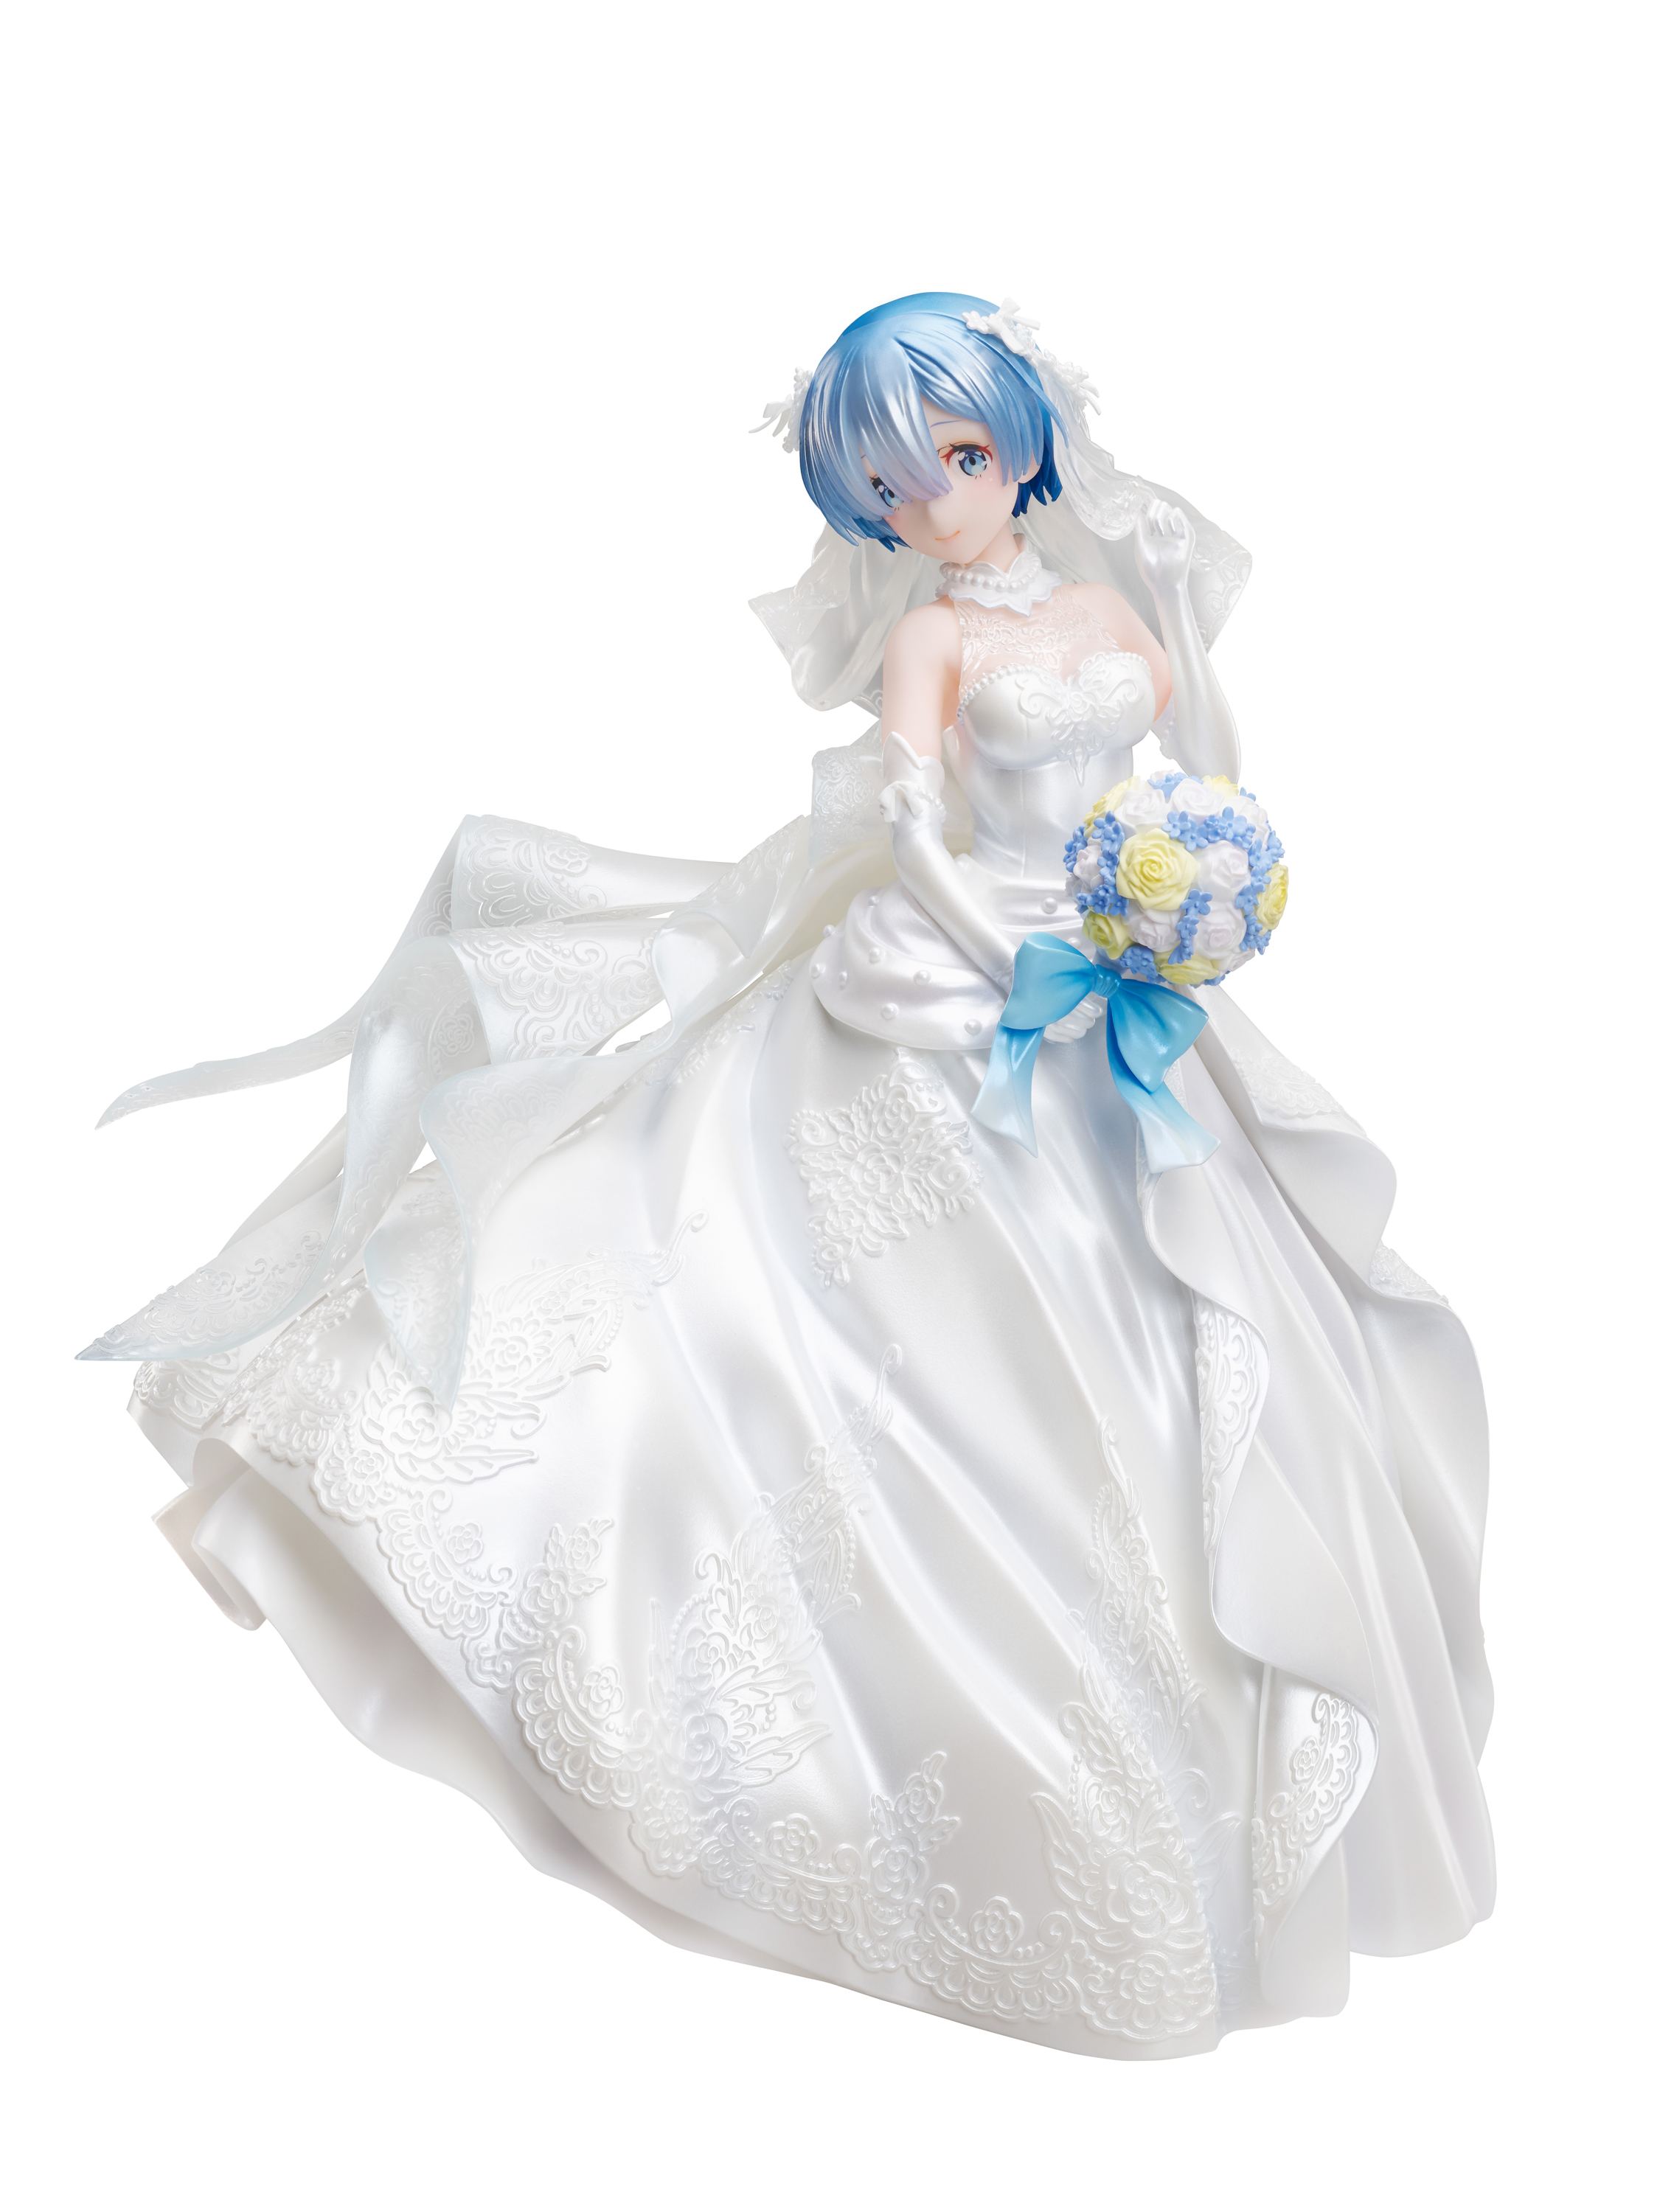 Re:Zero Starting Life in Another World 1/7 Scale Pre-Painted Figure: Rem Wedding Dress FuRyu